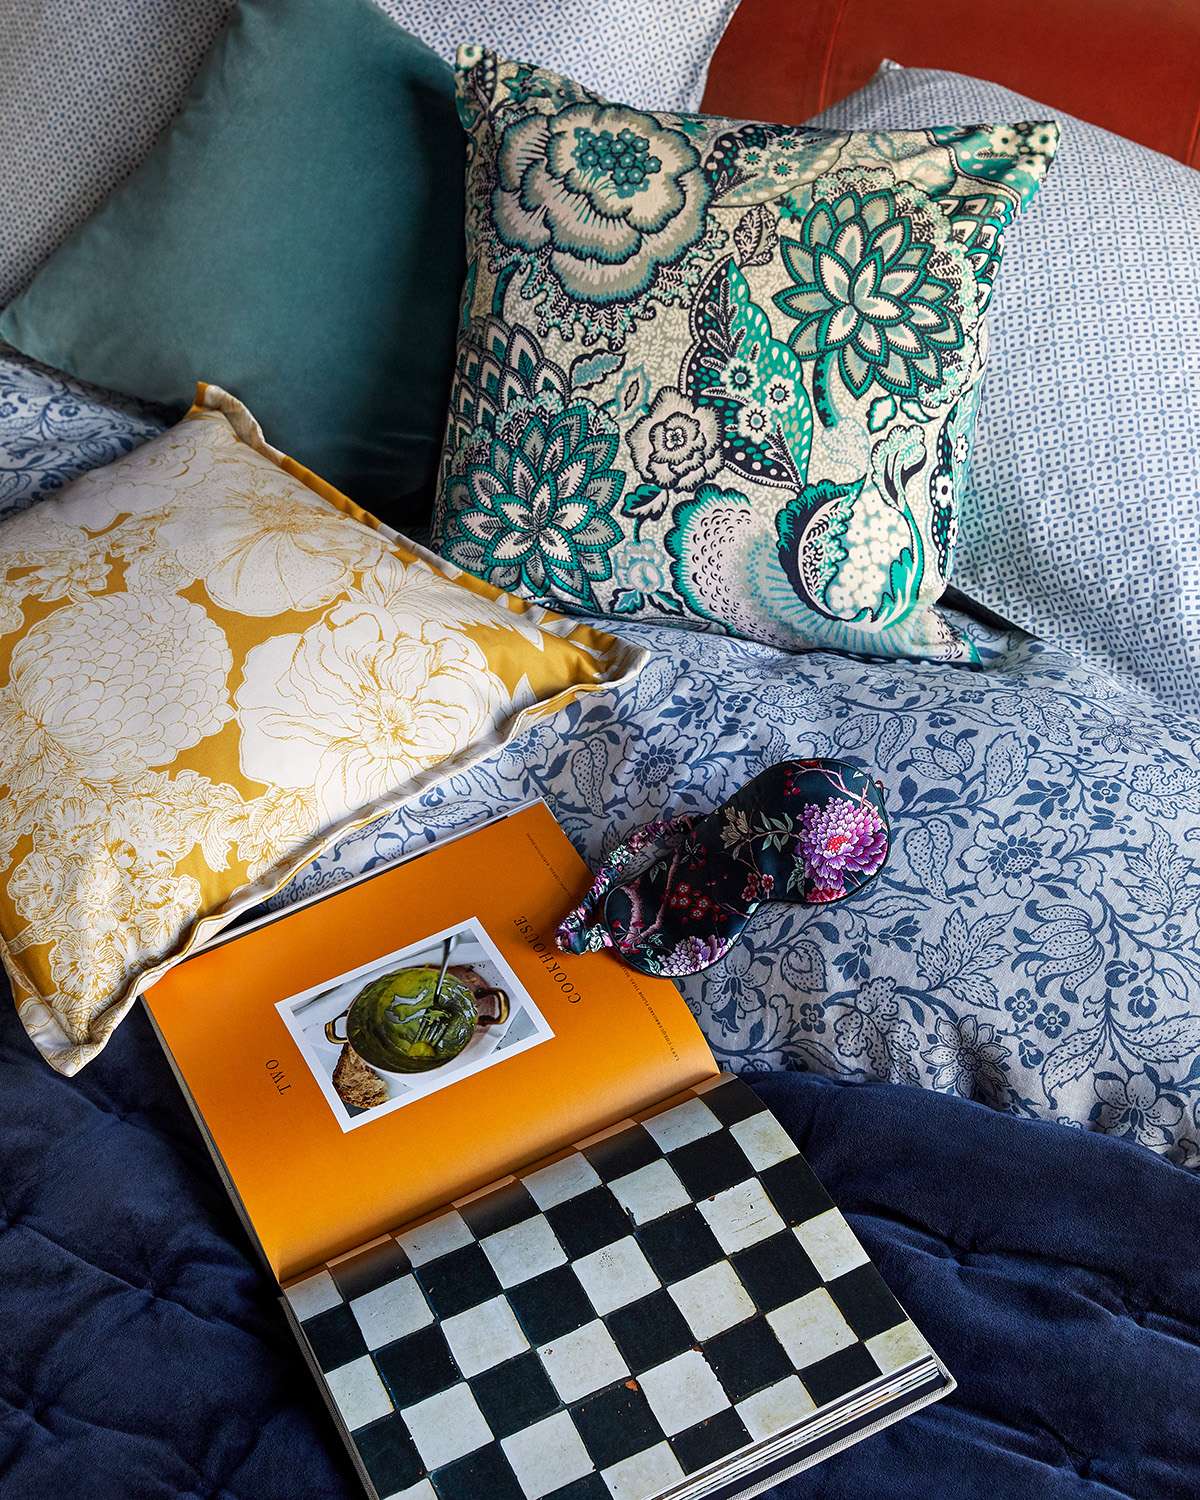 Come & Stay: Get Your Guest Bedroom Sleepover Ready